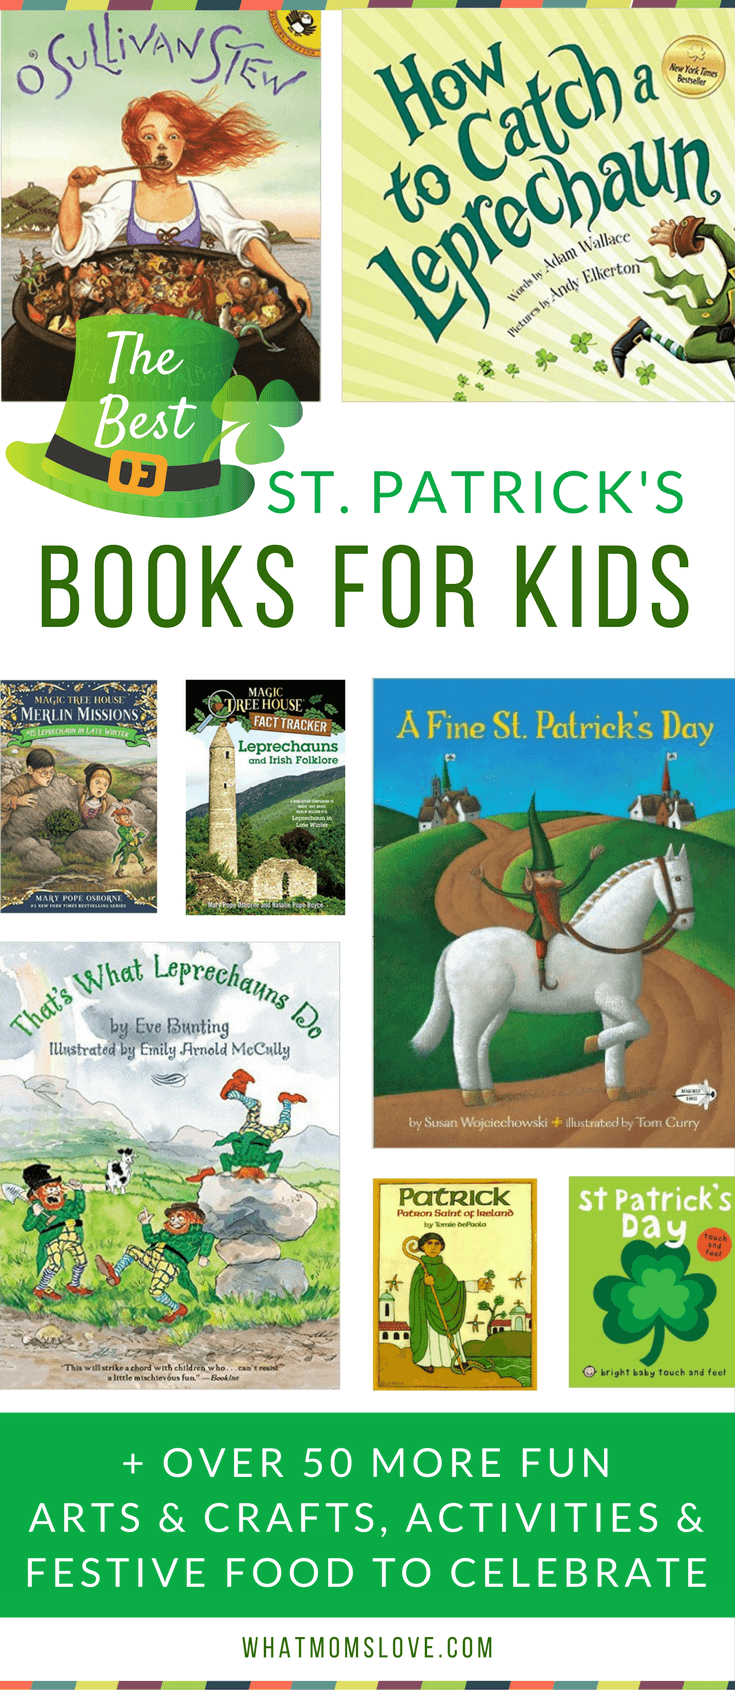 The Best St Patricks Day Books For Kids + Arts and Crafts, DIY, Printables, Activities, Leprechaun Traps, Tricks and Festive Food to celebrate!